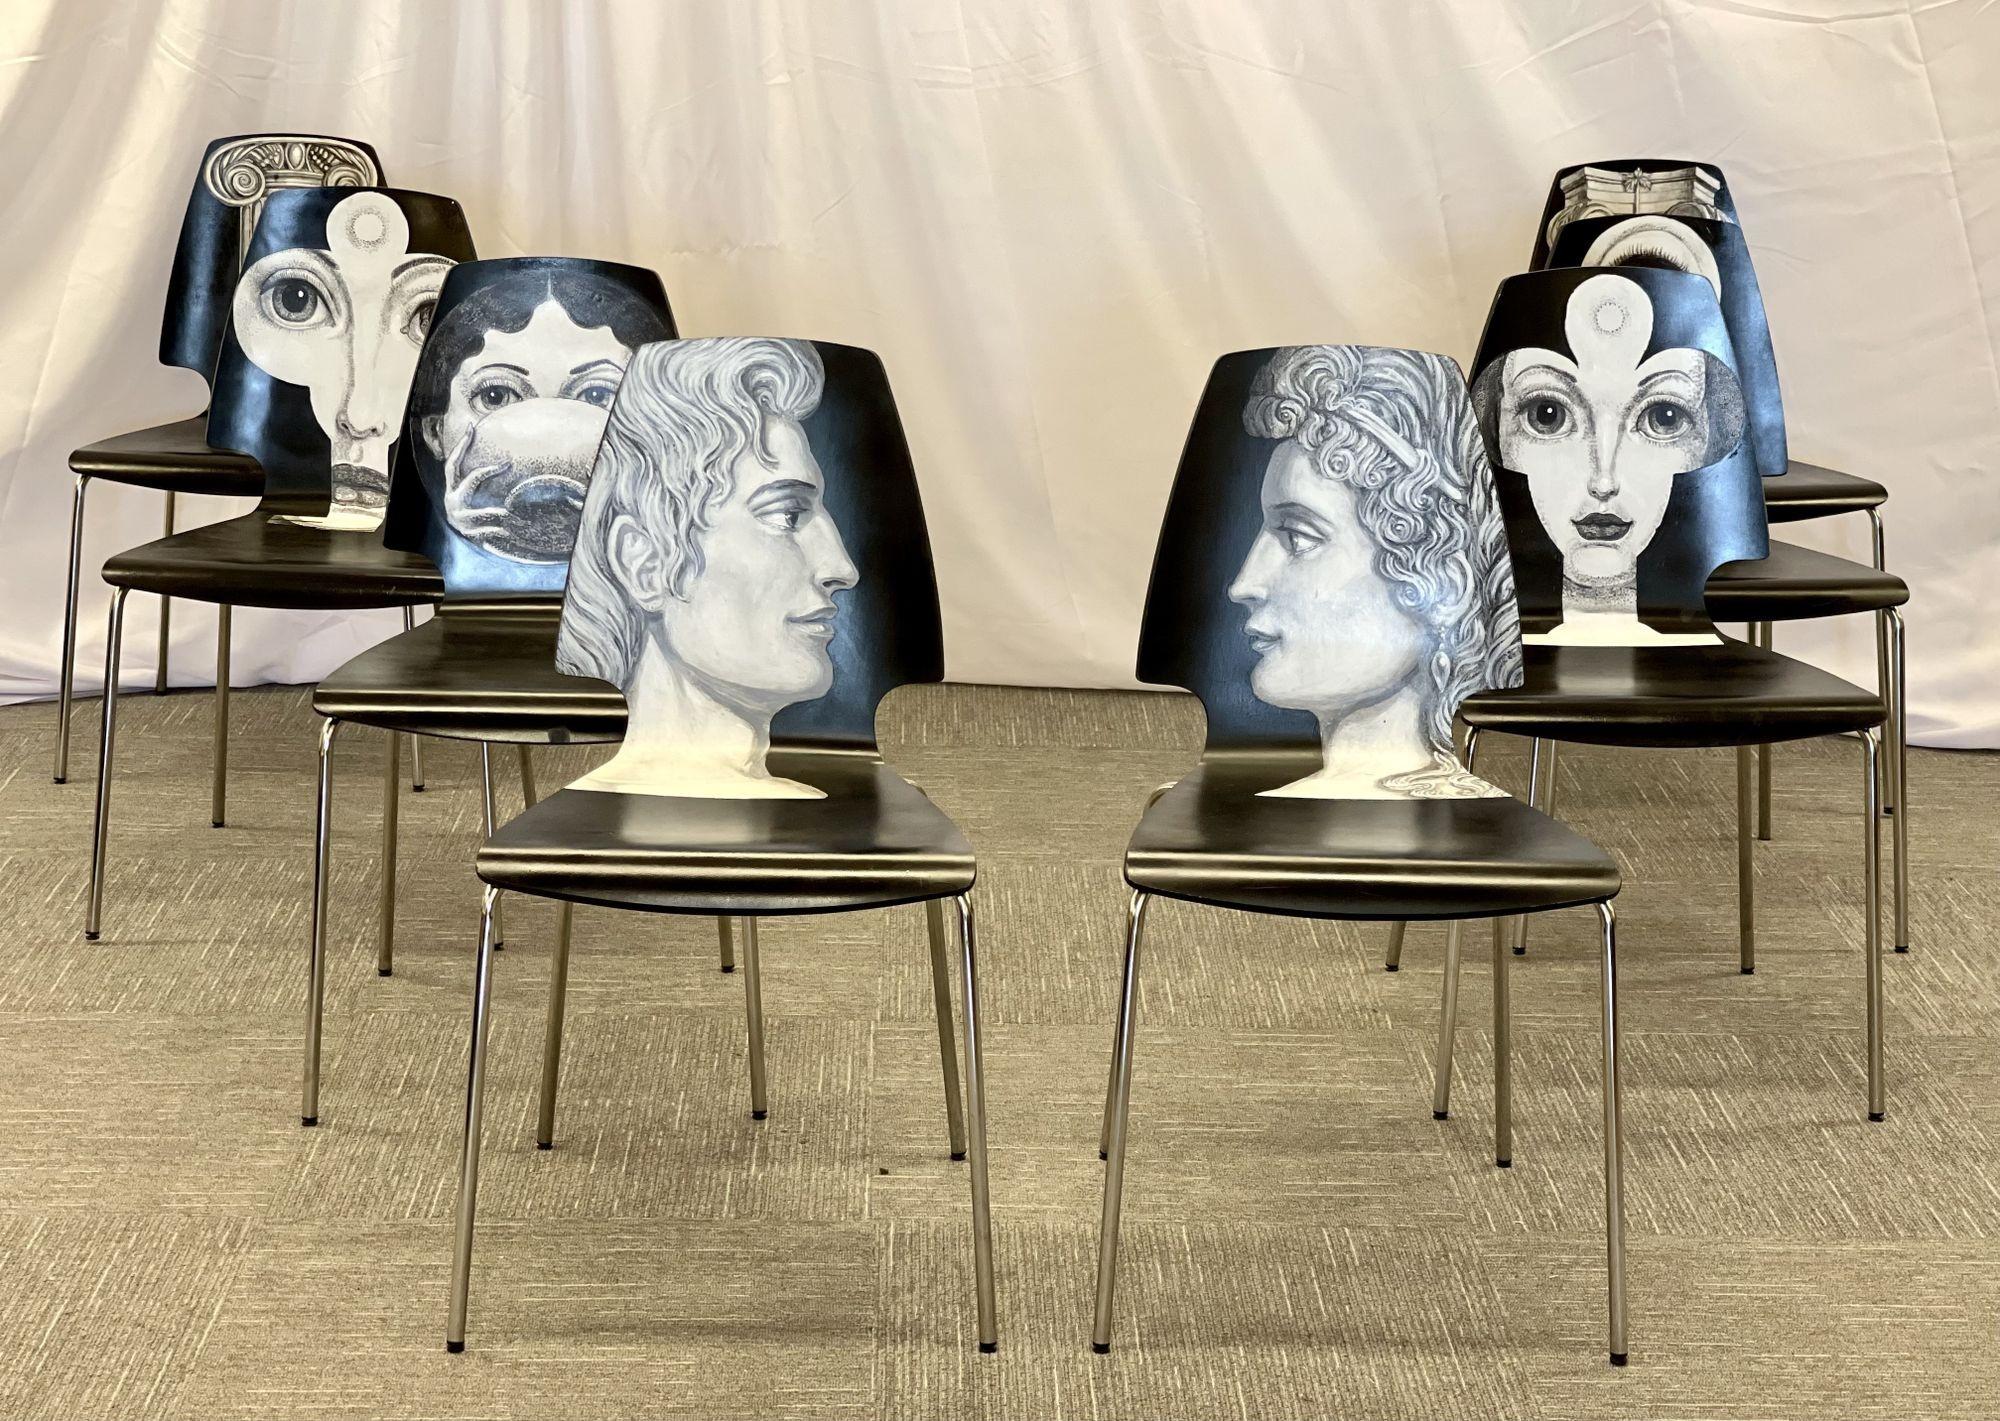 Eight Mid-Century Modern Piero Fornasetti Style dining / side chairs, Italy
 
Set of 8 finely detailed, hand painted, mid-century dining or side chairs. Each chair depicts a different face of a man or woman. These chairs are similar in nature to